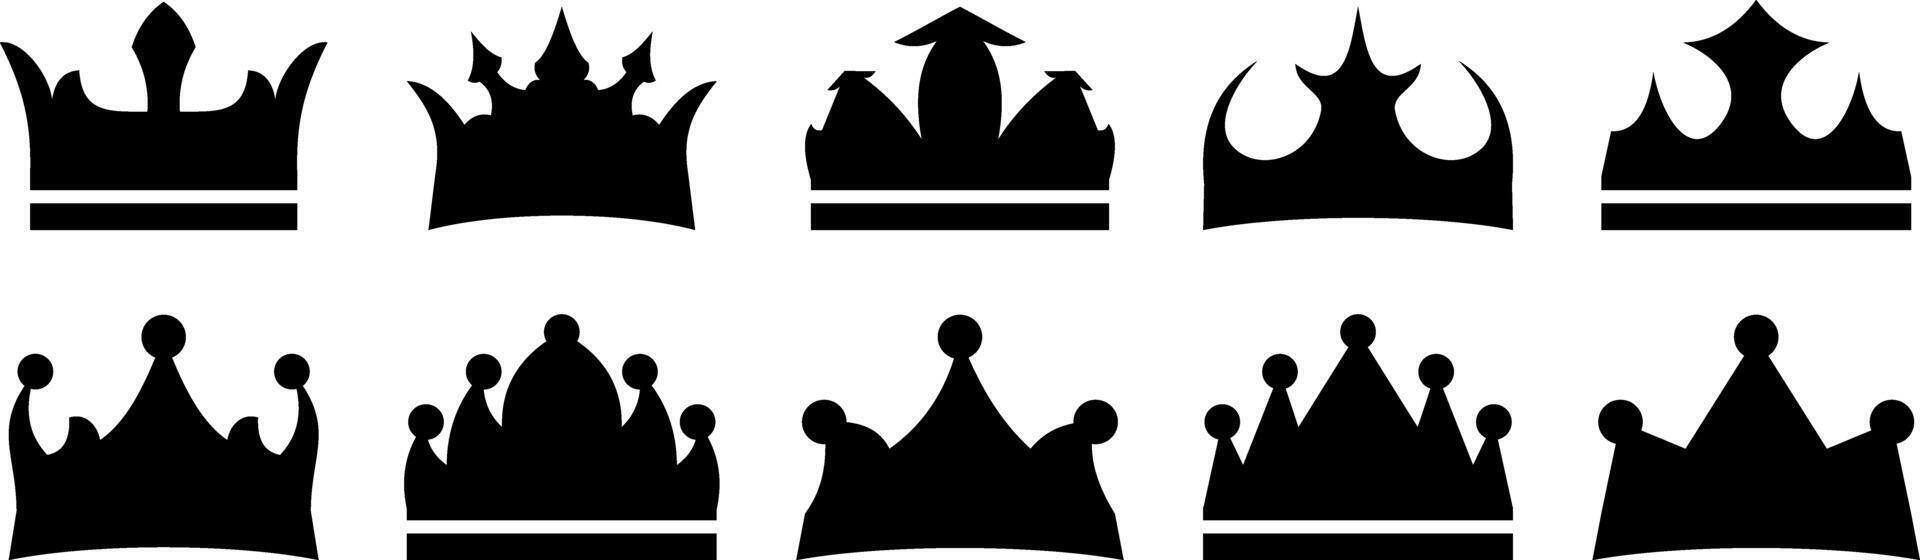 crown icon silhouette collection. simple sign vector isolated on white background. design for logo, application, web, poster.